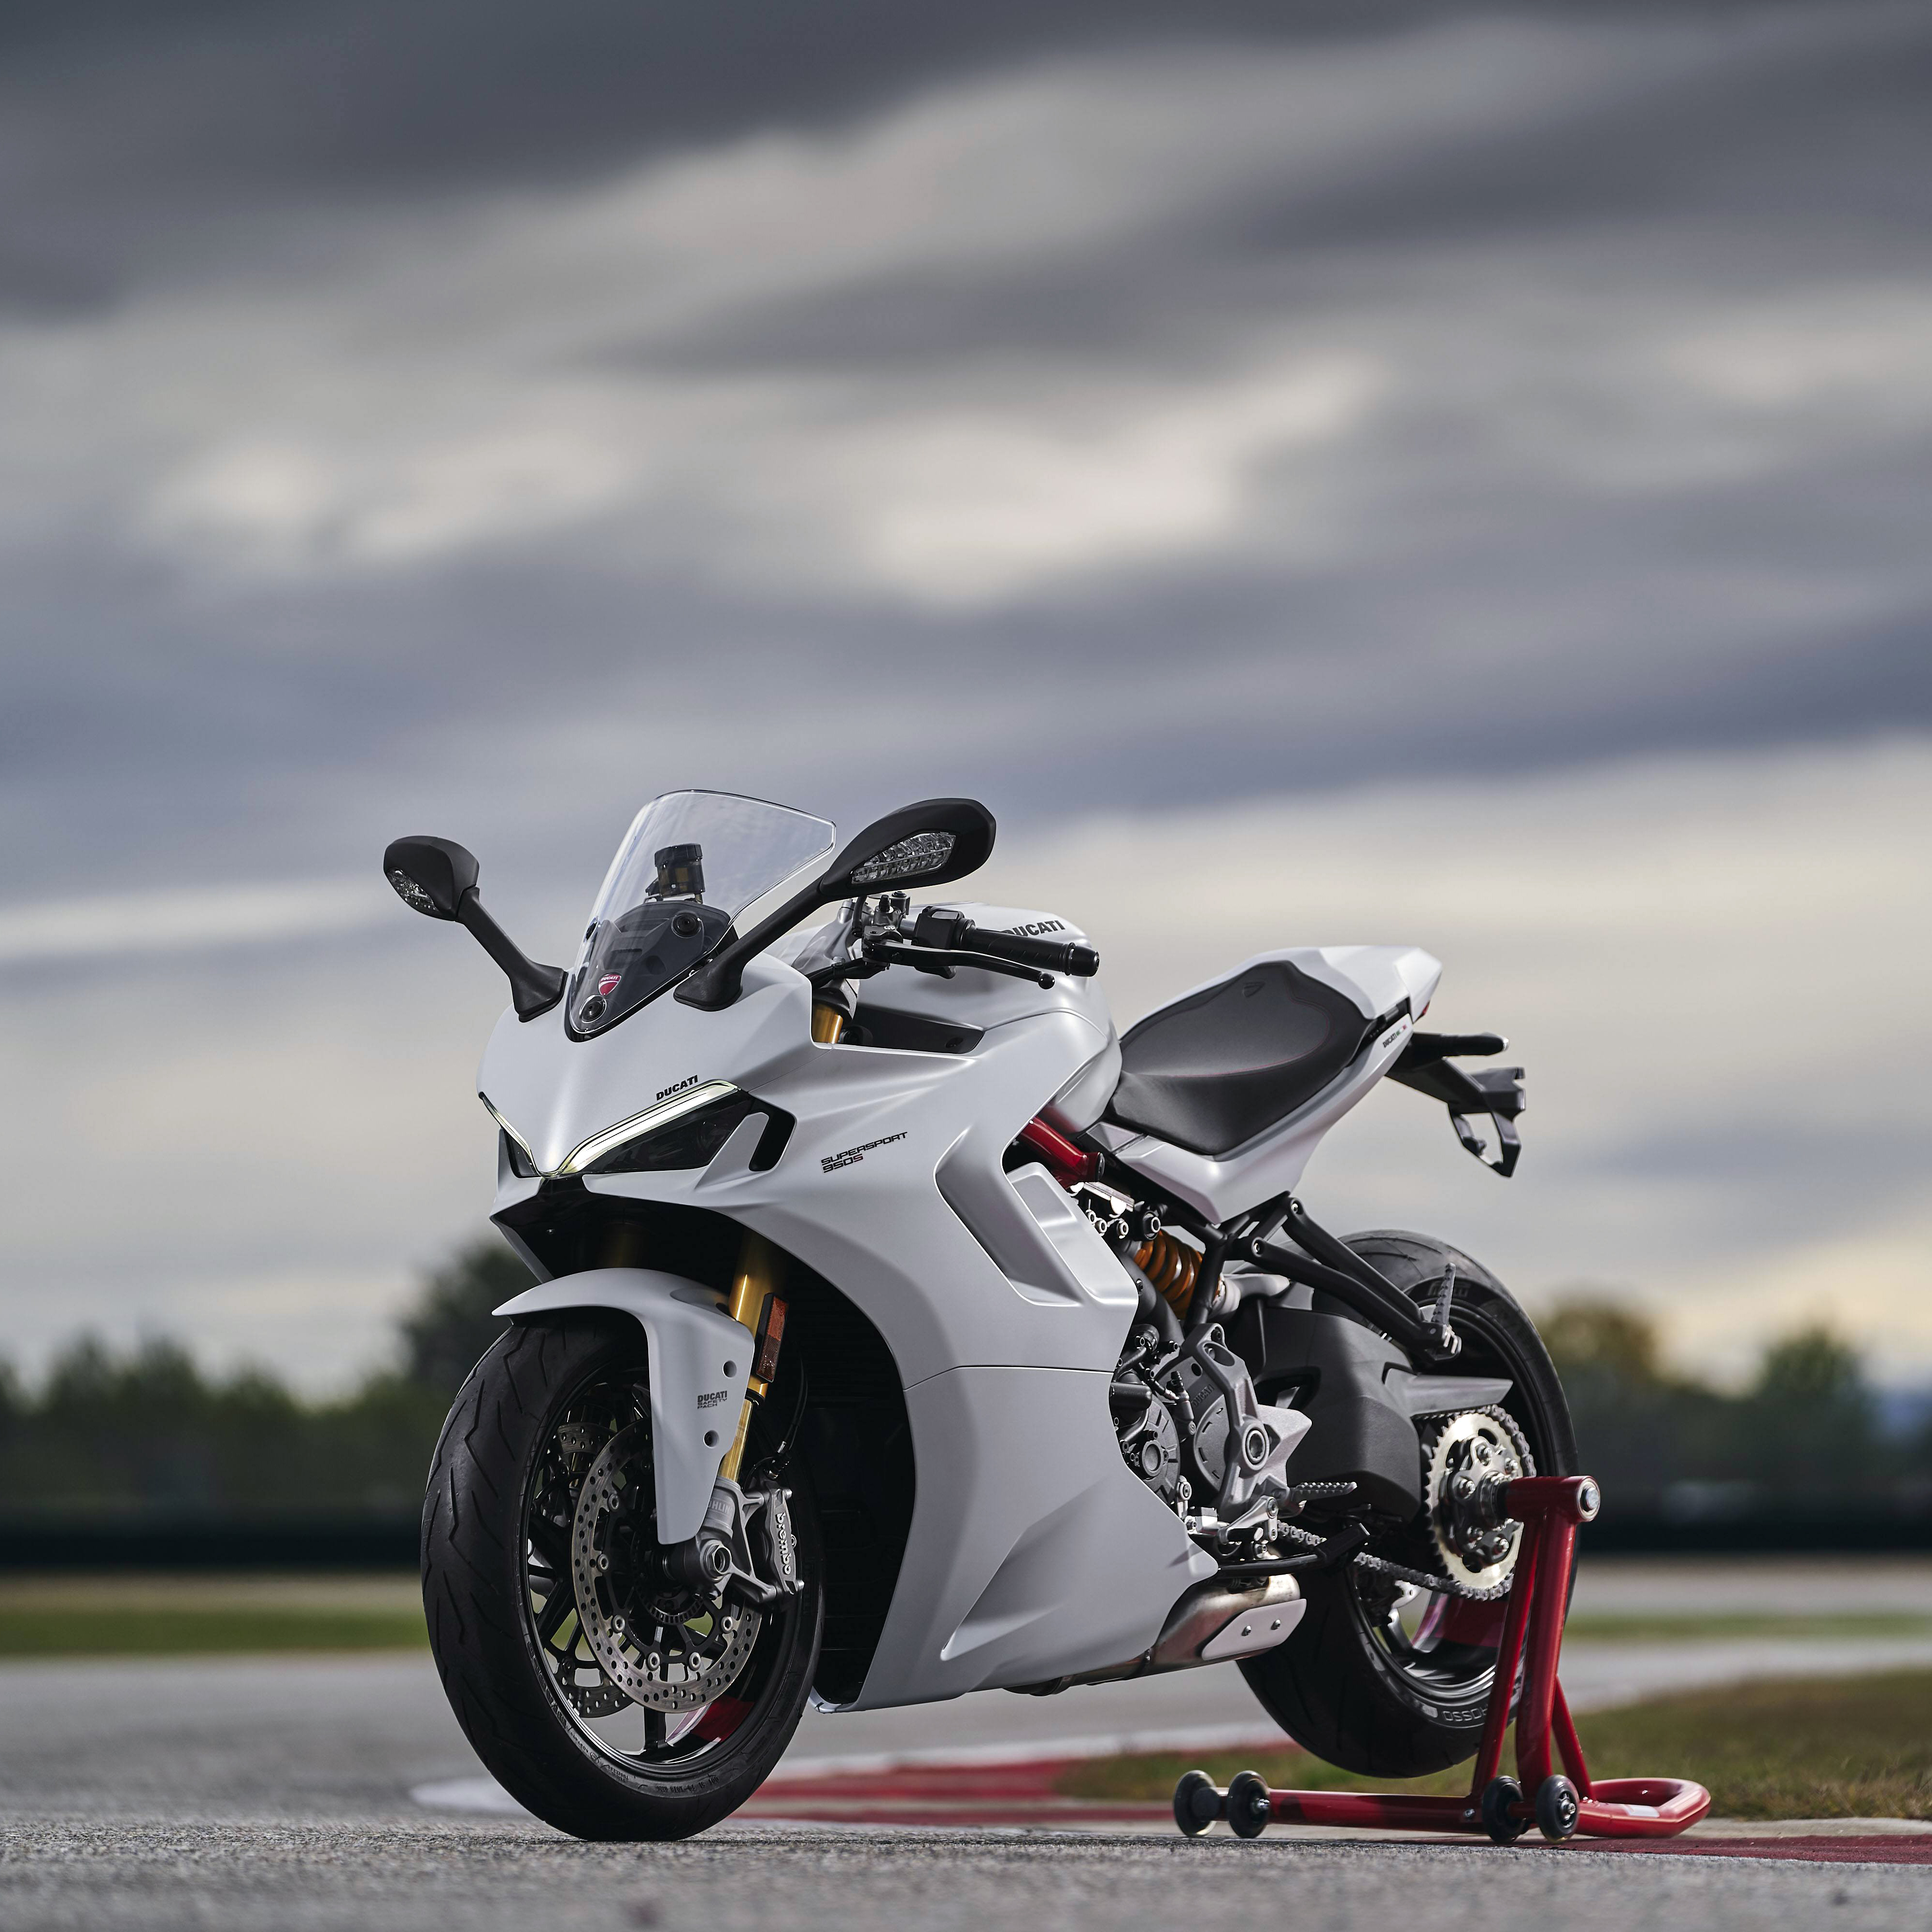 What Do You Want To Know About The 2017 Ducati SuperSport? | Cycle World